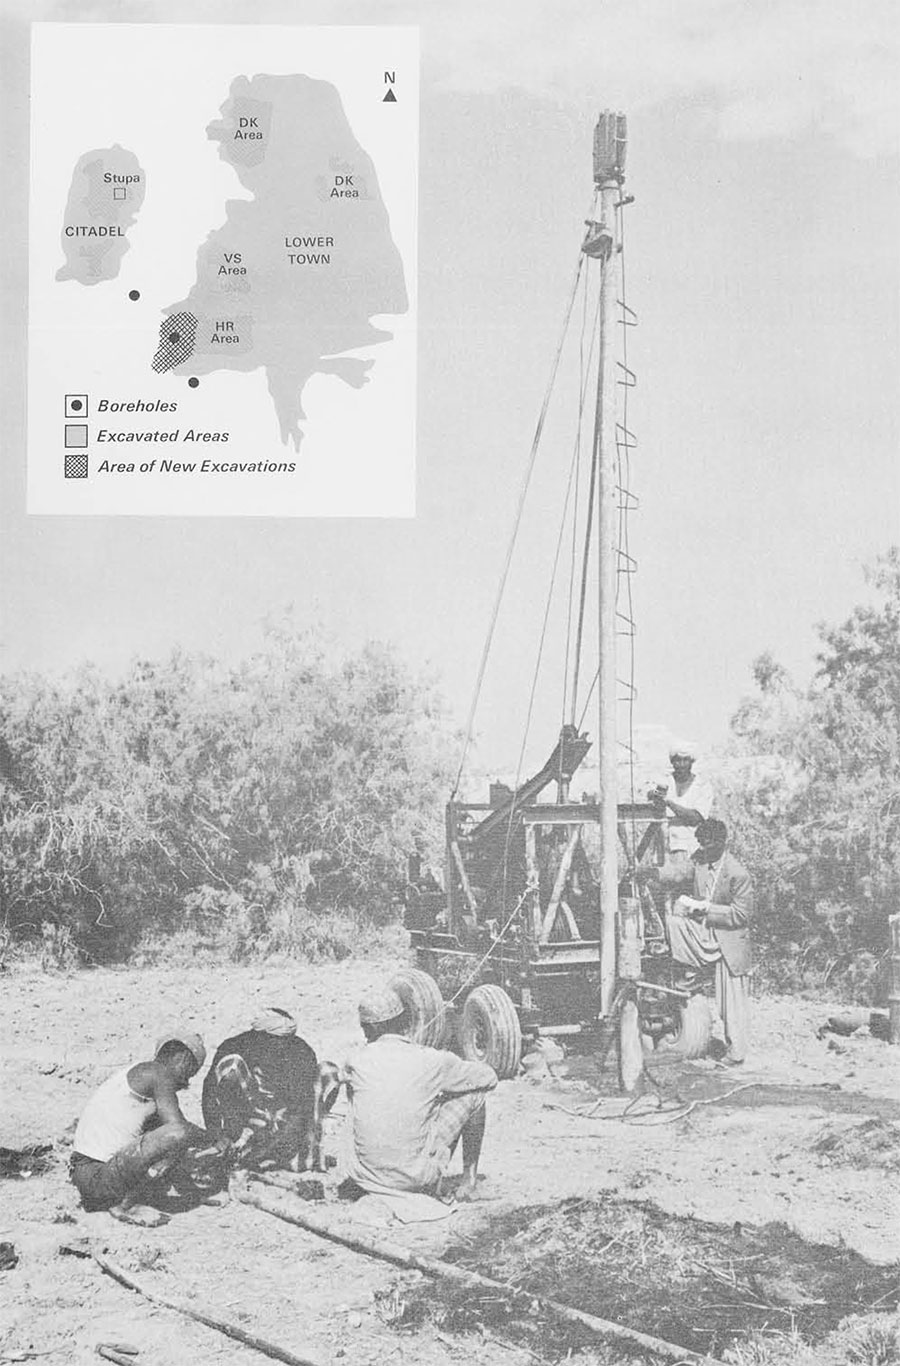 A rig to bore holes in the ground, a group of people stand nearby.